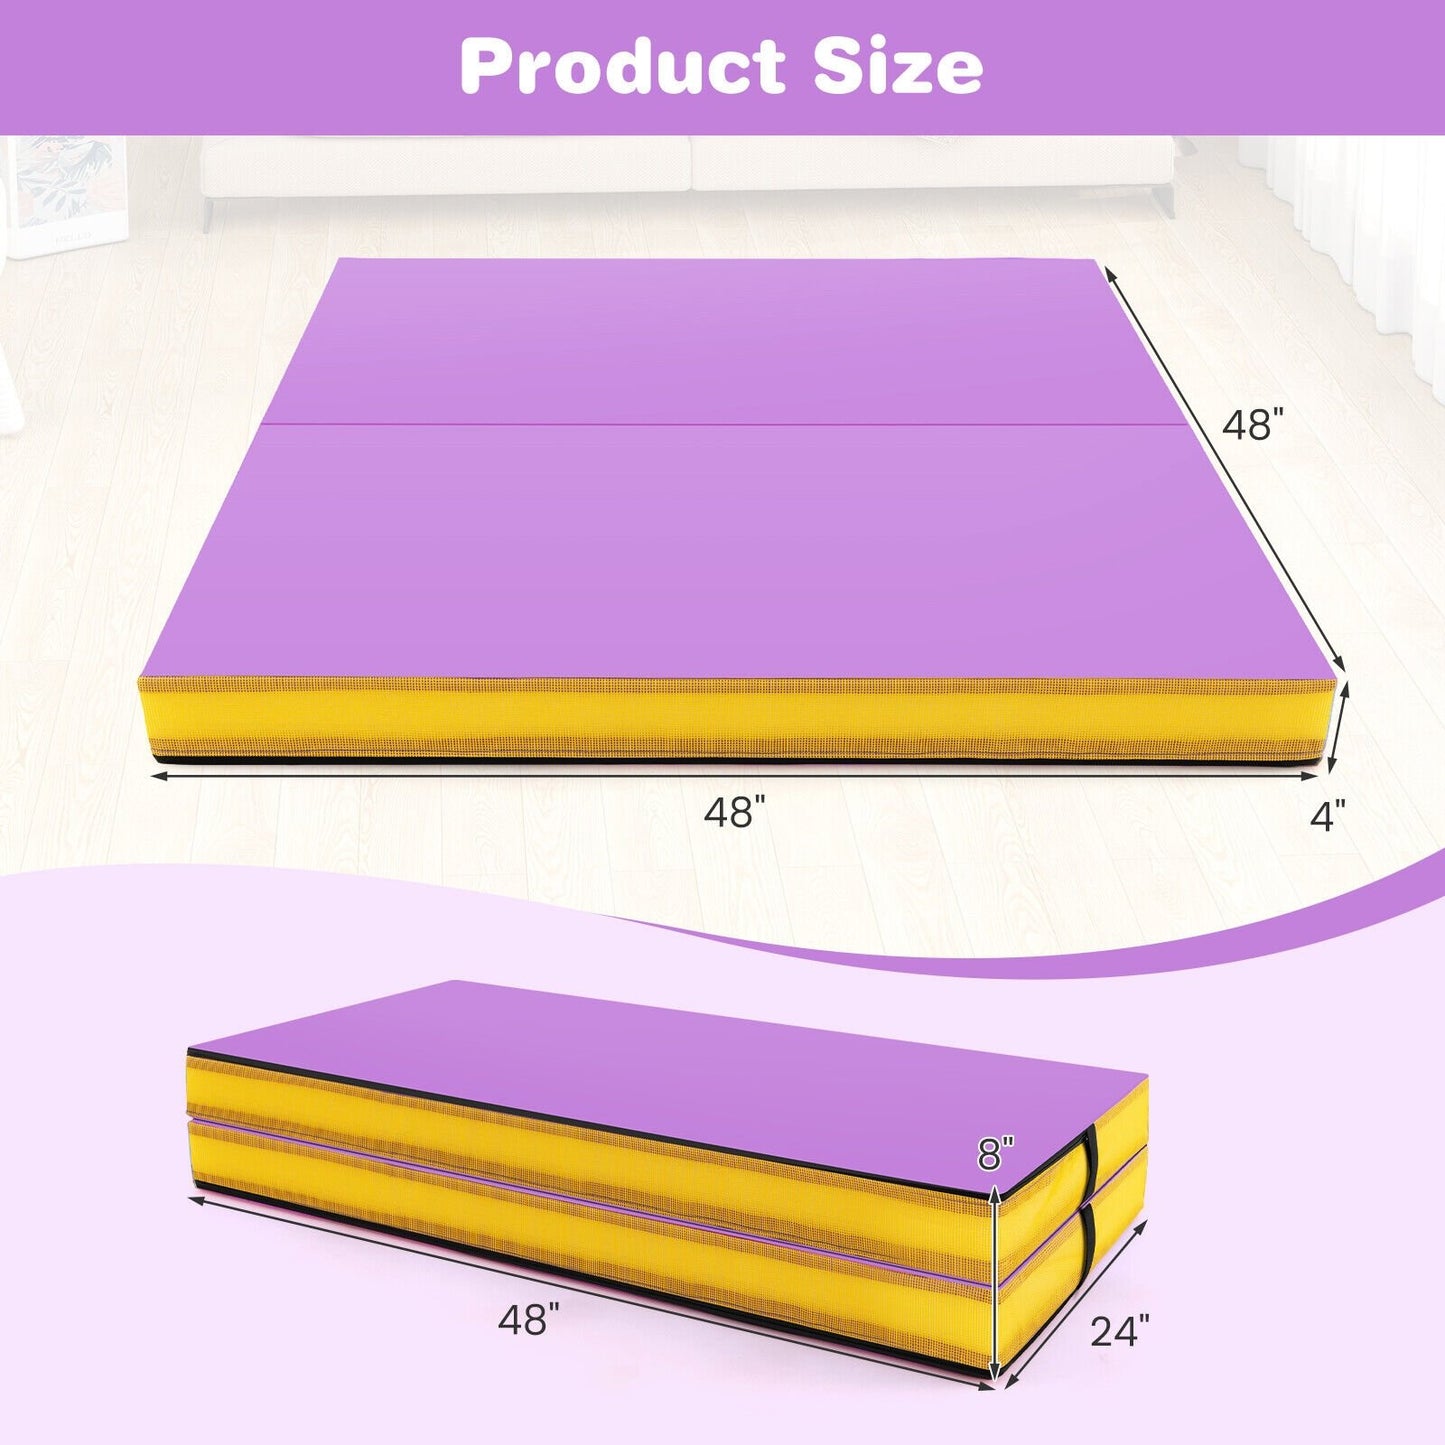 4ft x 4ft x 4in Bi-Folding Gymnastic Tumbling Mat with Handles and Cover, Purple - Gallery Canada